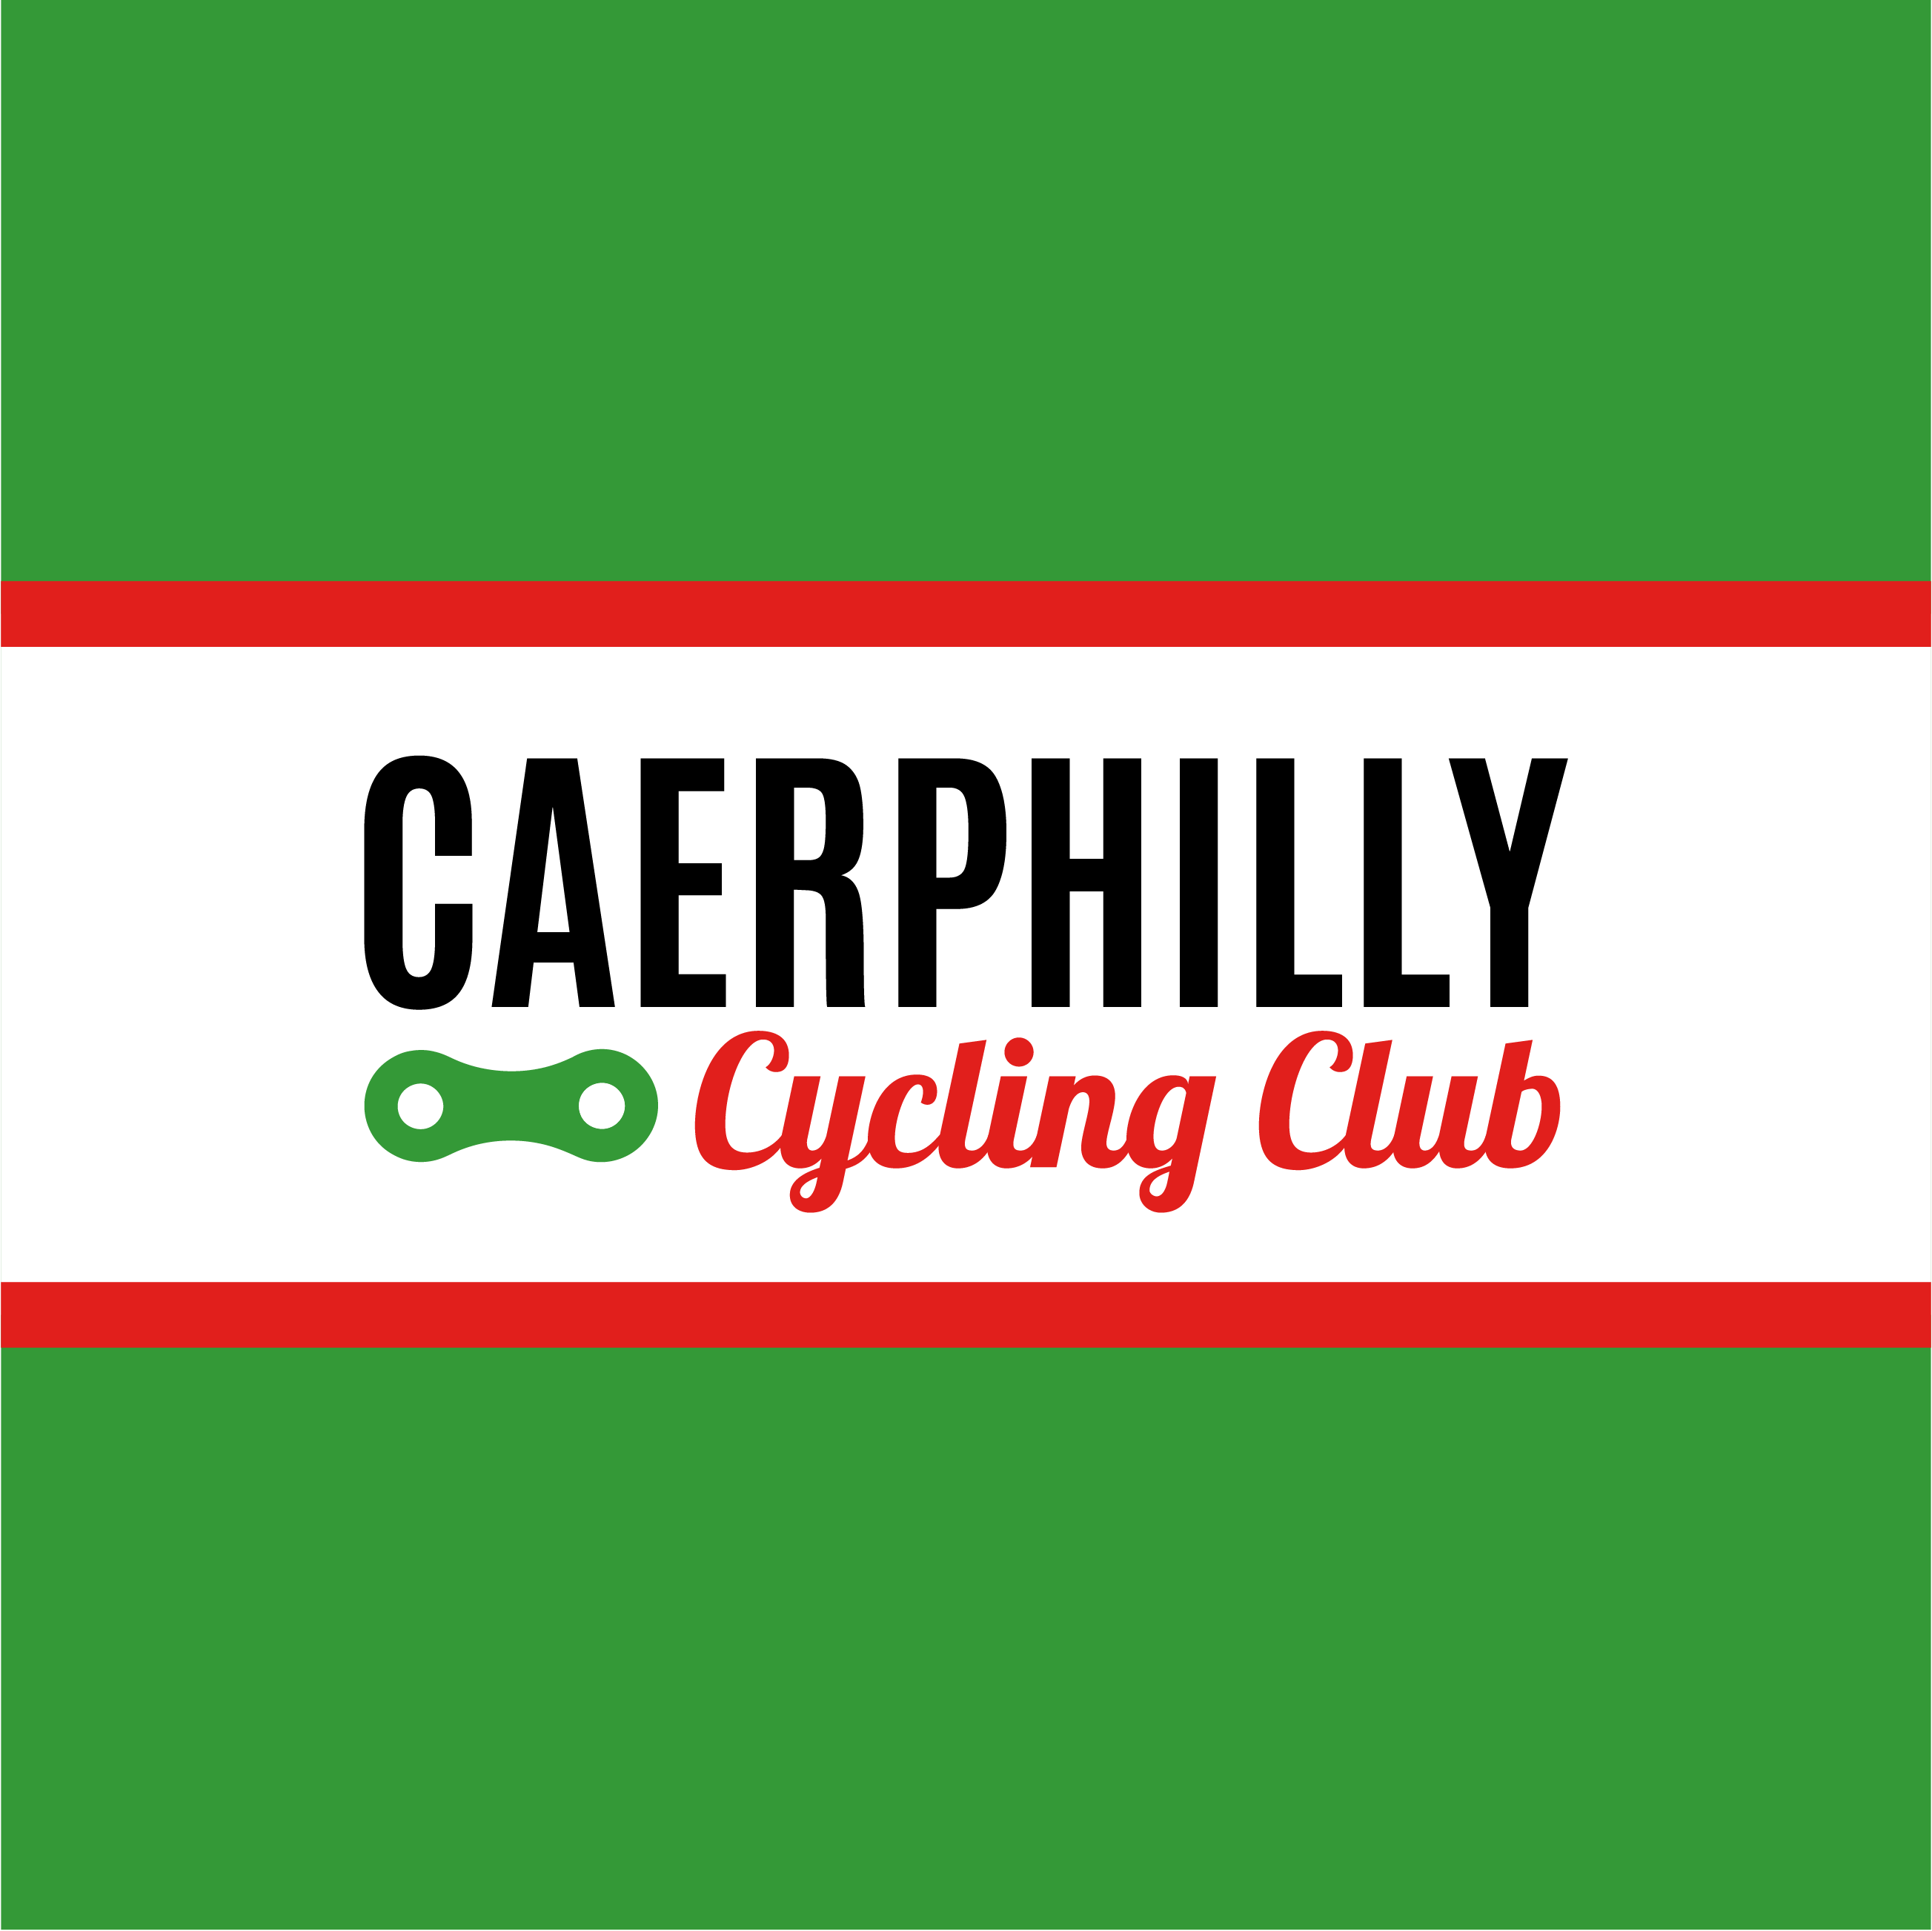 Club Image for CAERPHILLY CYCLING CLUB